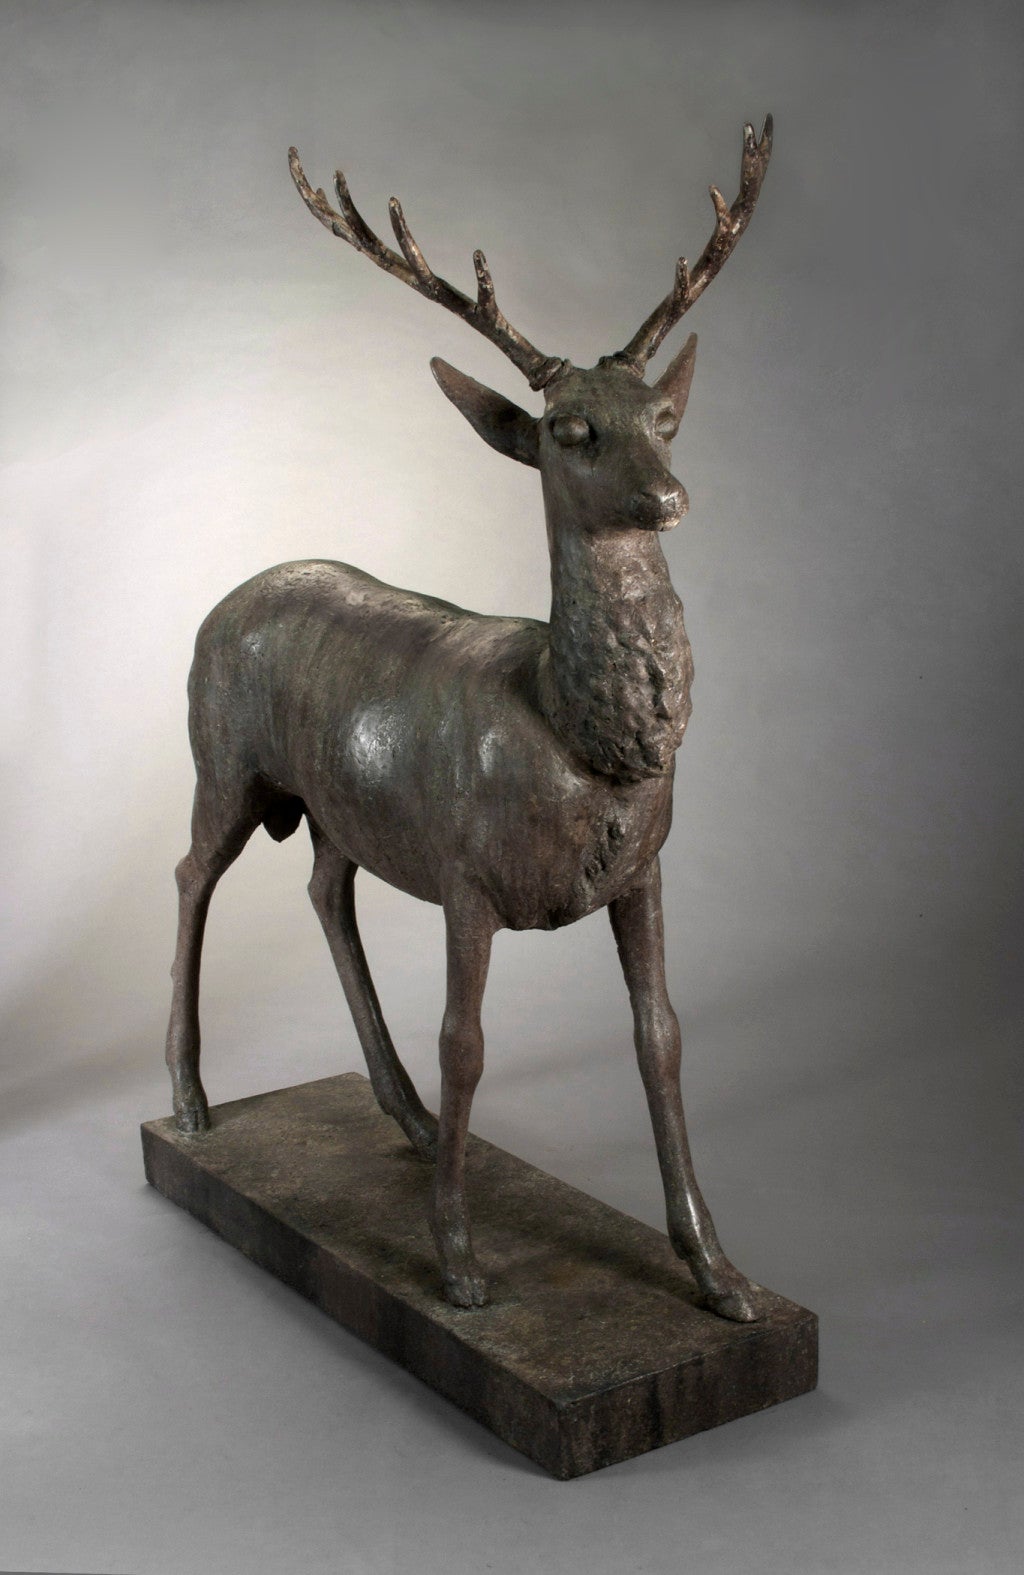 Standing alert with head turned slightly to the right, on a rectangular base.  Attributed to J.W.Fiske & Co.  (1870-1893)  The Fiske company of New York City was one of the leading makers and retailers of ornamental iron and zinc decorations during